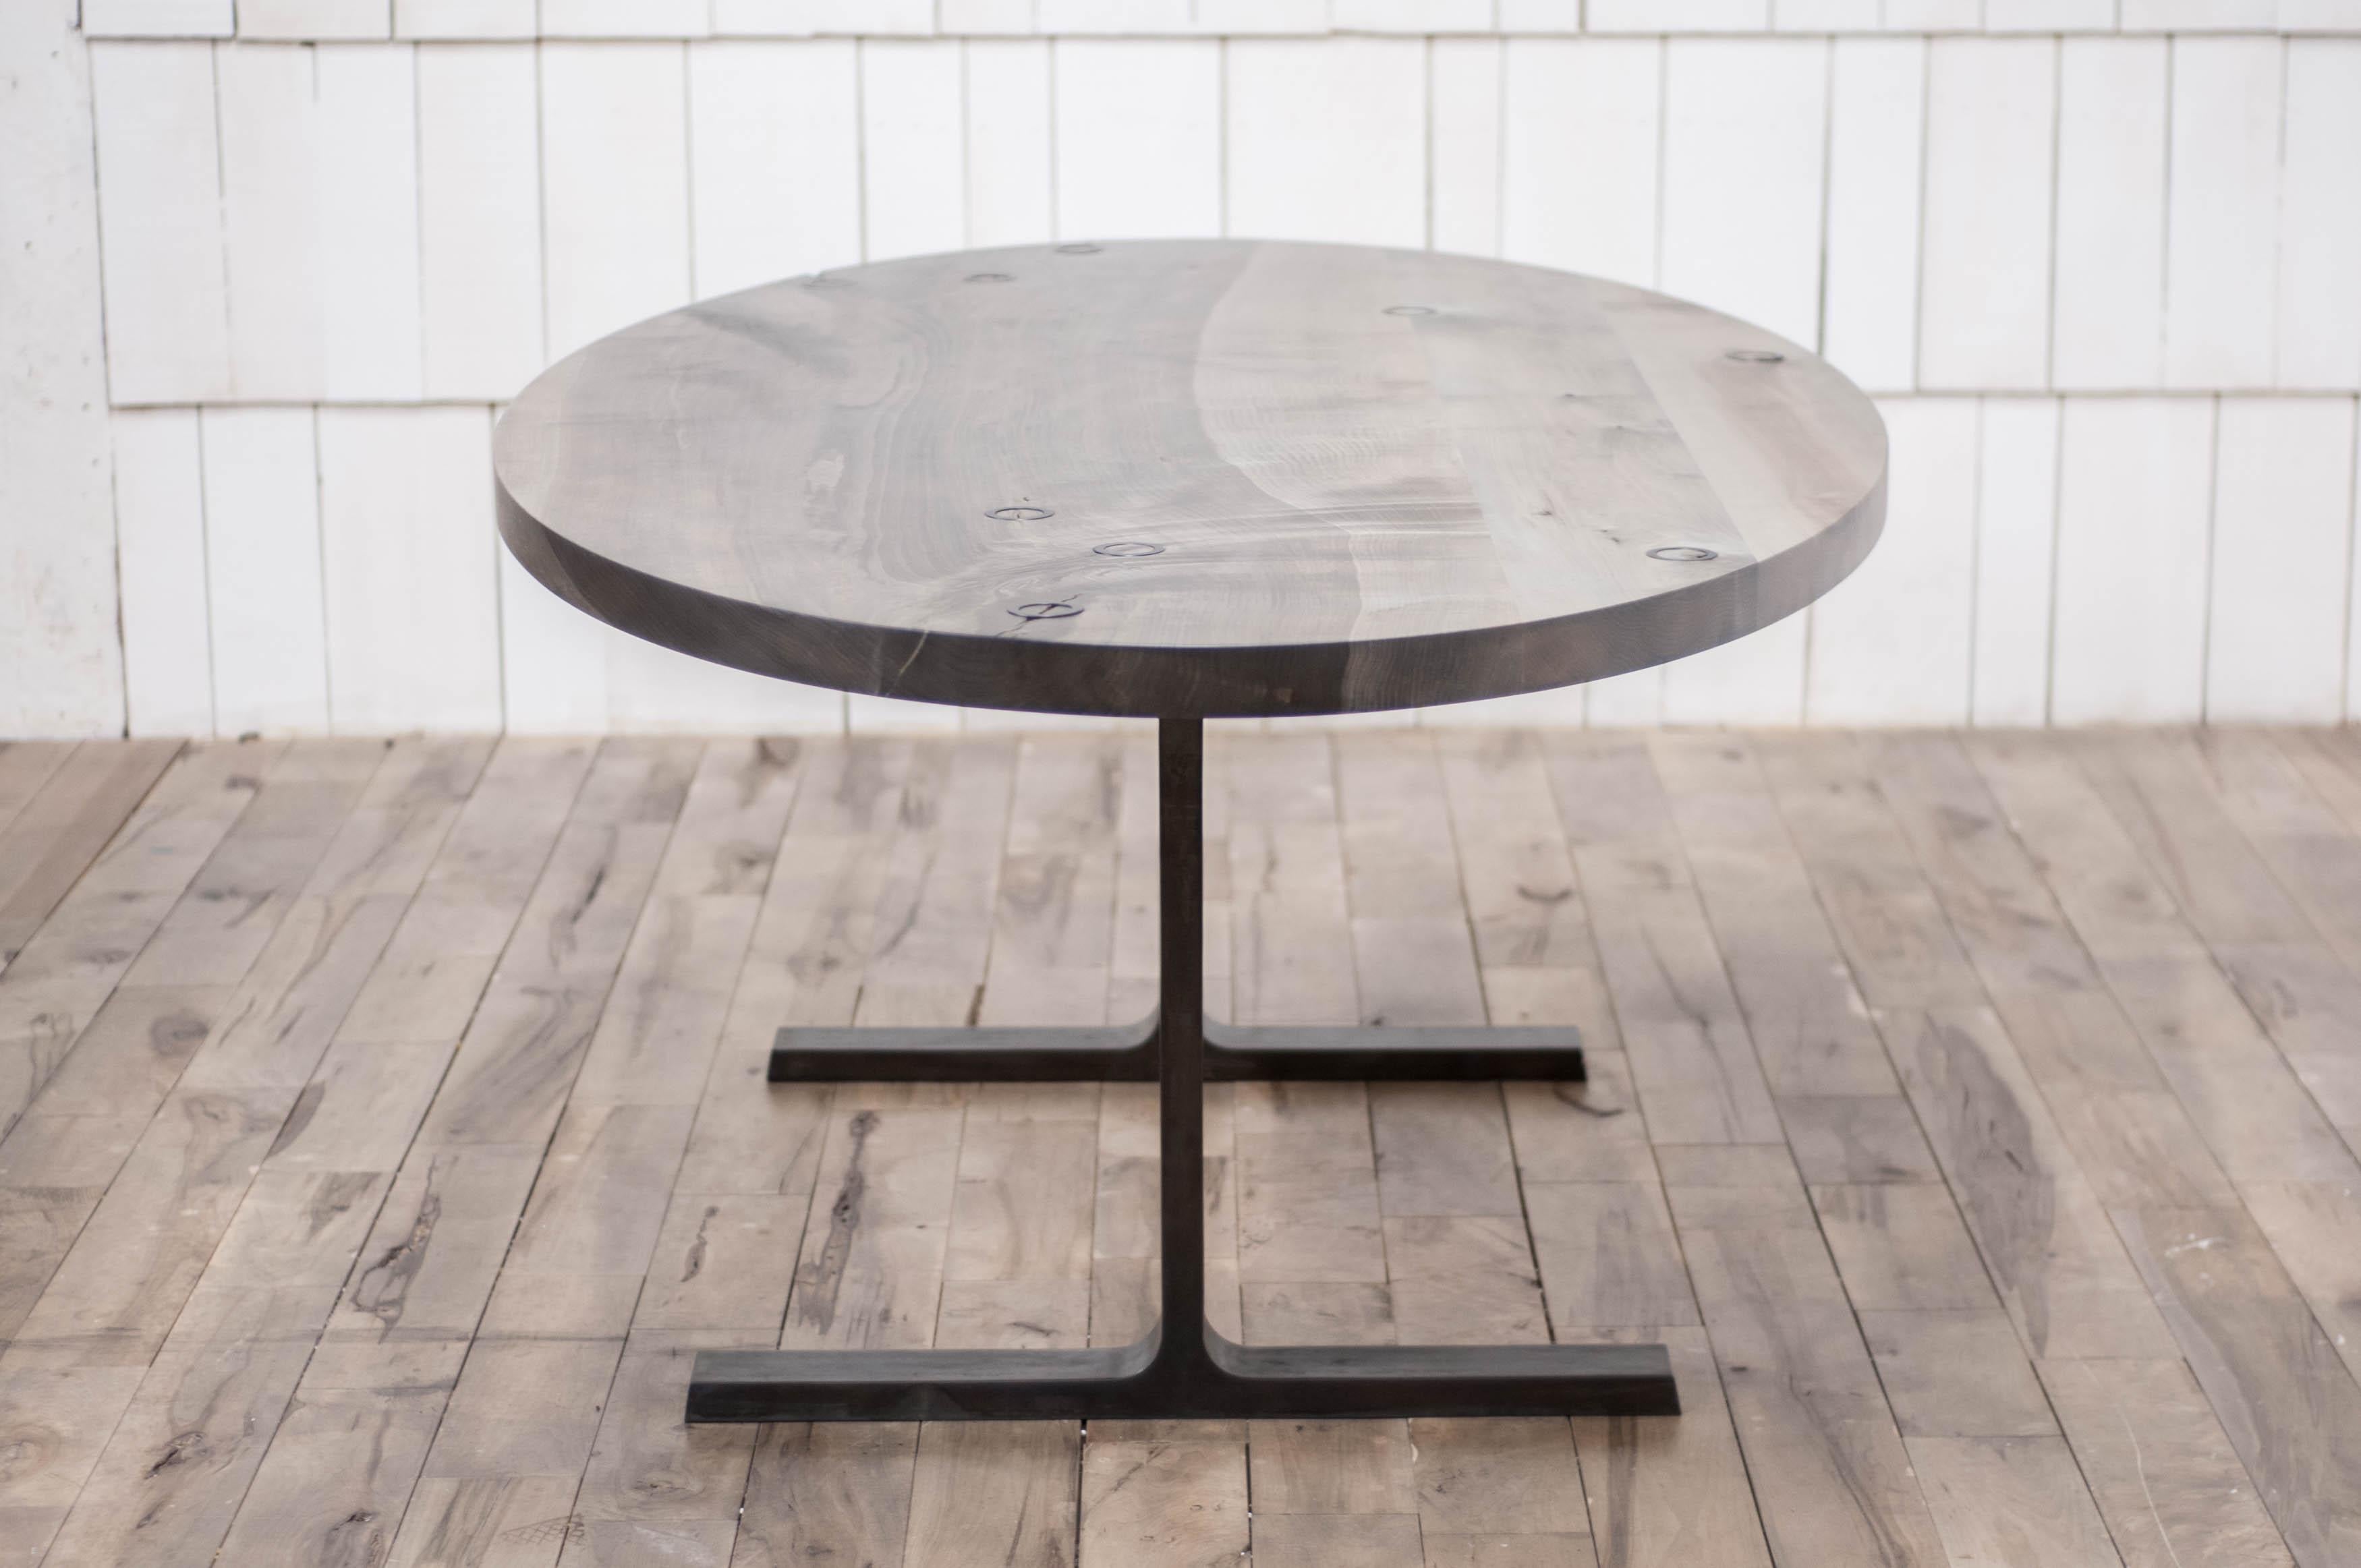 Canadian Oval Bronze Shaker Table in Oxidized Maple and Blackened Bronze